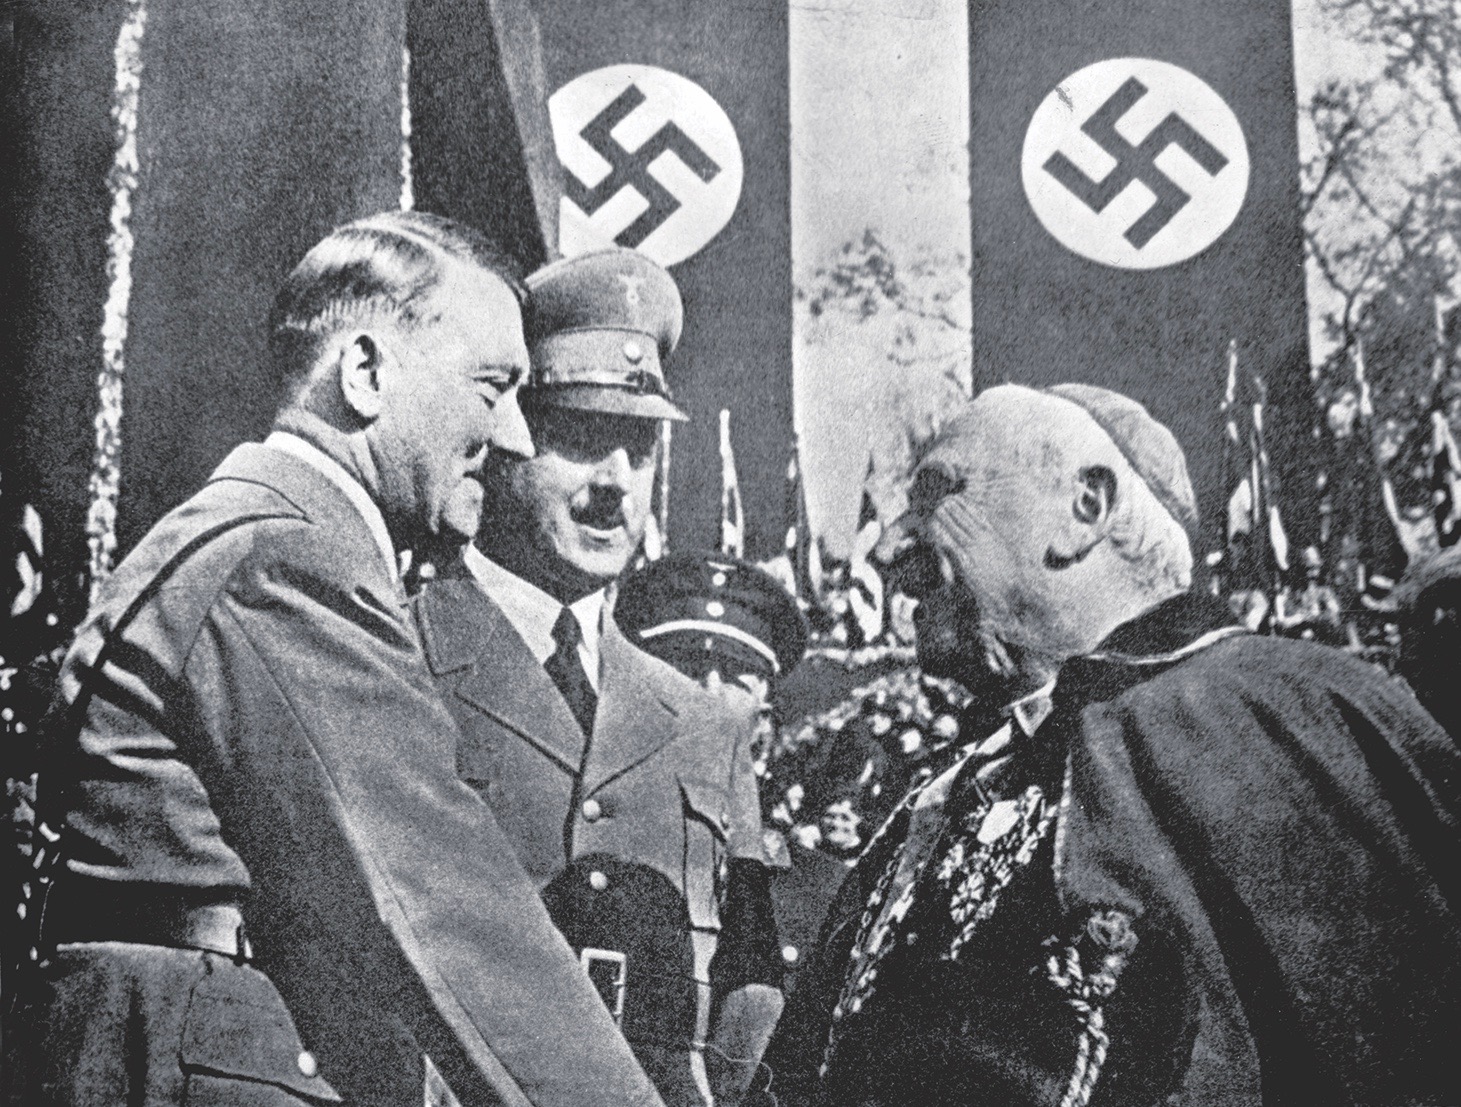 Adolf Hitler initially sought to curry favor with the Roman Catholic Church but later persecuted priests, nuns and lay leaders. (Picture Alliance, Getty Images)